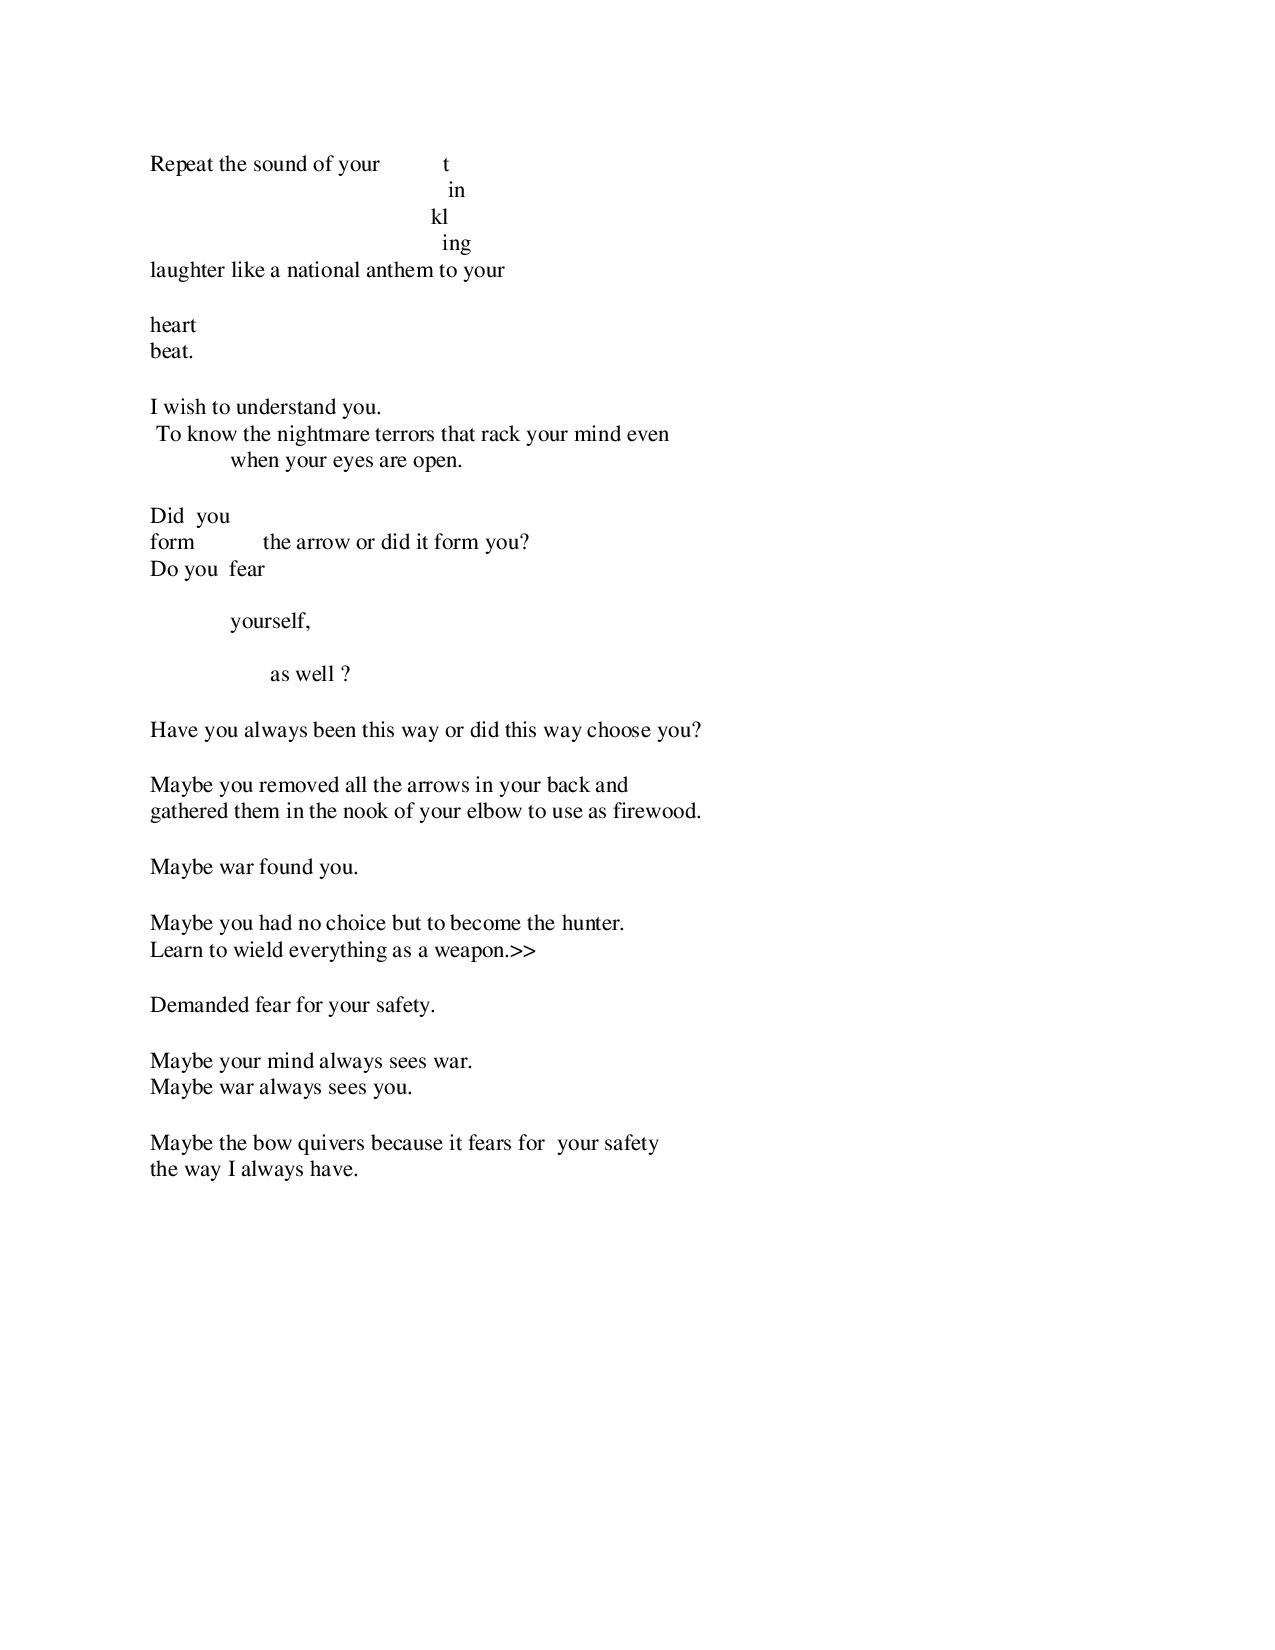 Formatted poem, page 2